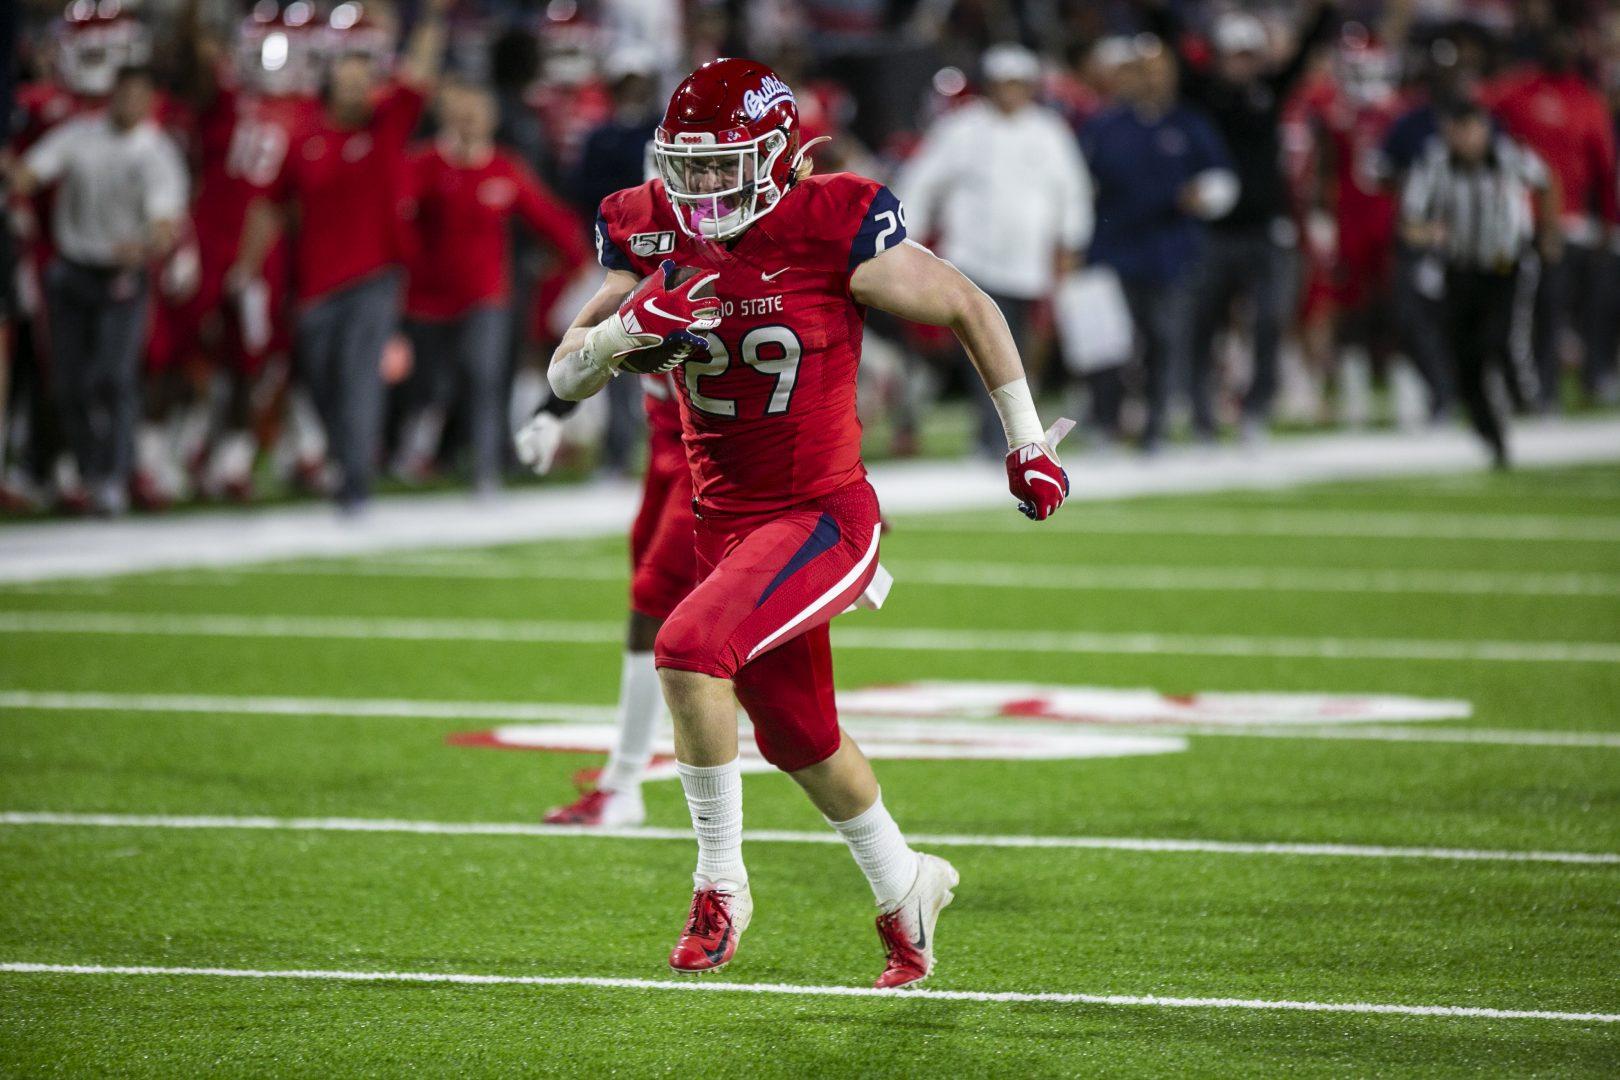 Fresno State linebacker Justin Rice recovers and scores a touchdown during a home victory against the University of Nevada Las Vegas at Bulldog Stadium on Friday, Oct. 18, 2019. (Larry Valenzuela/The Collegian)